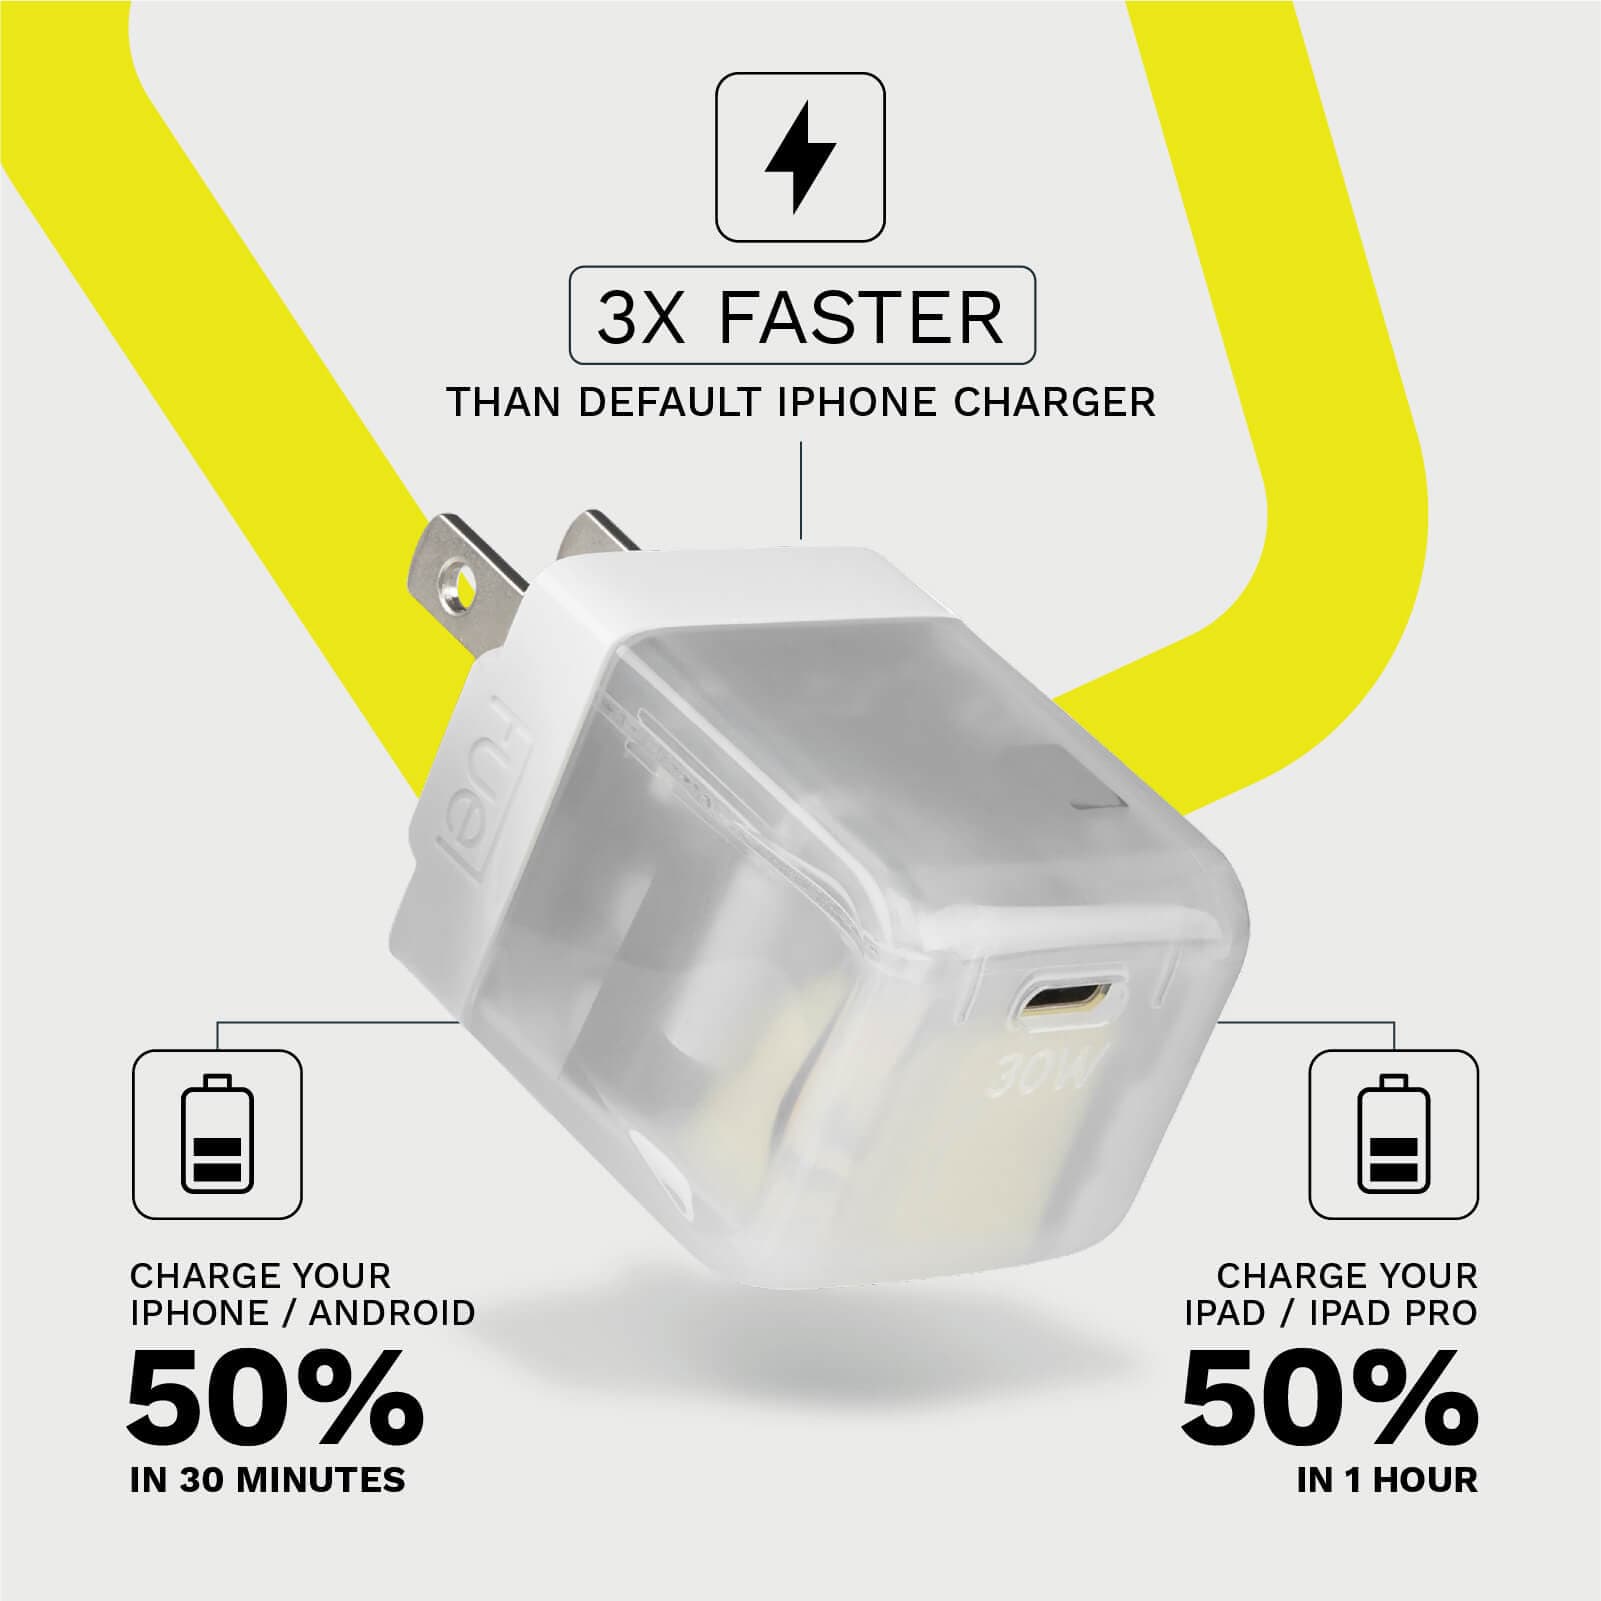 3X FASTER THAN DEFAULT IPHONE CHARGER. CHARGE YOUR IPHONE/ANDROID 50% IN 30 MINUTES OR CHARGE YOUR IPAD 50% IN 1 HOUR color::Frosted White